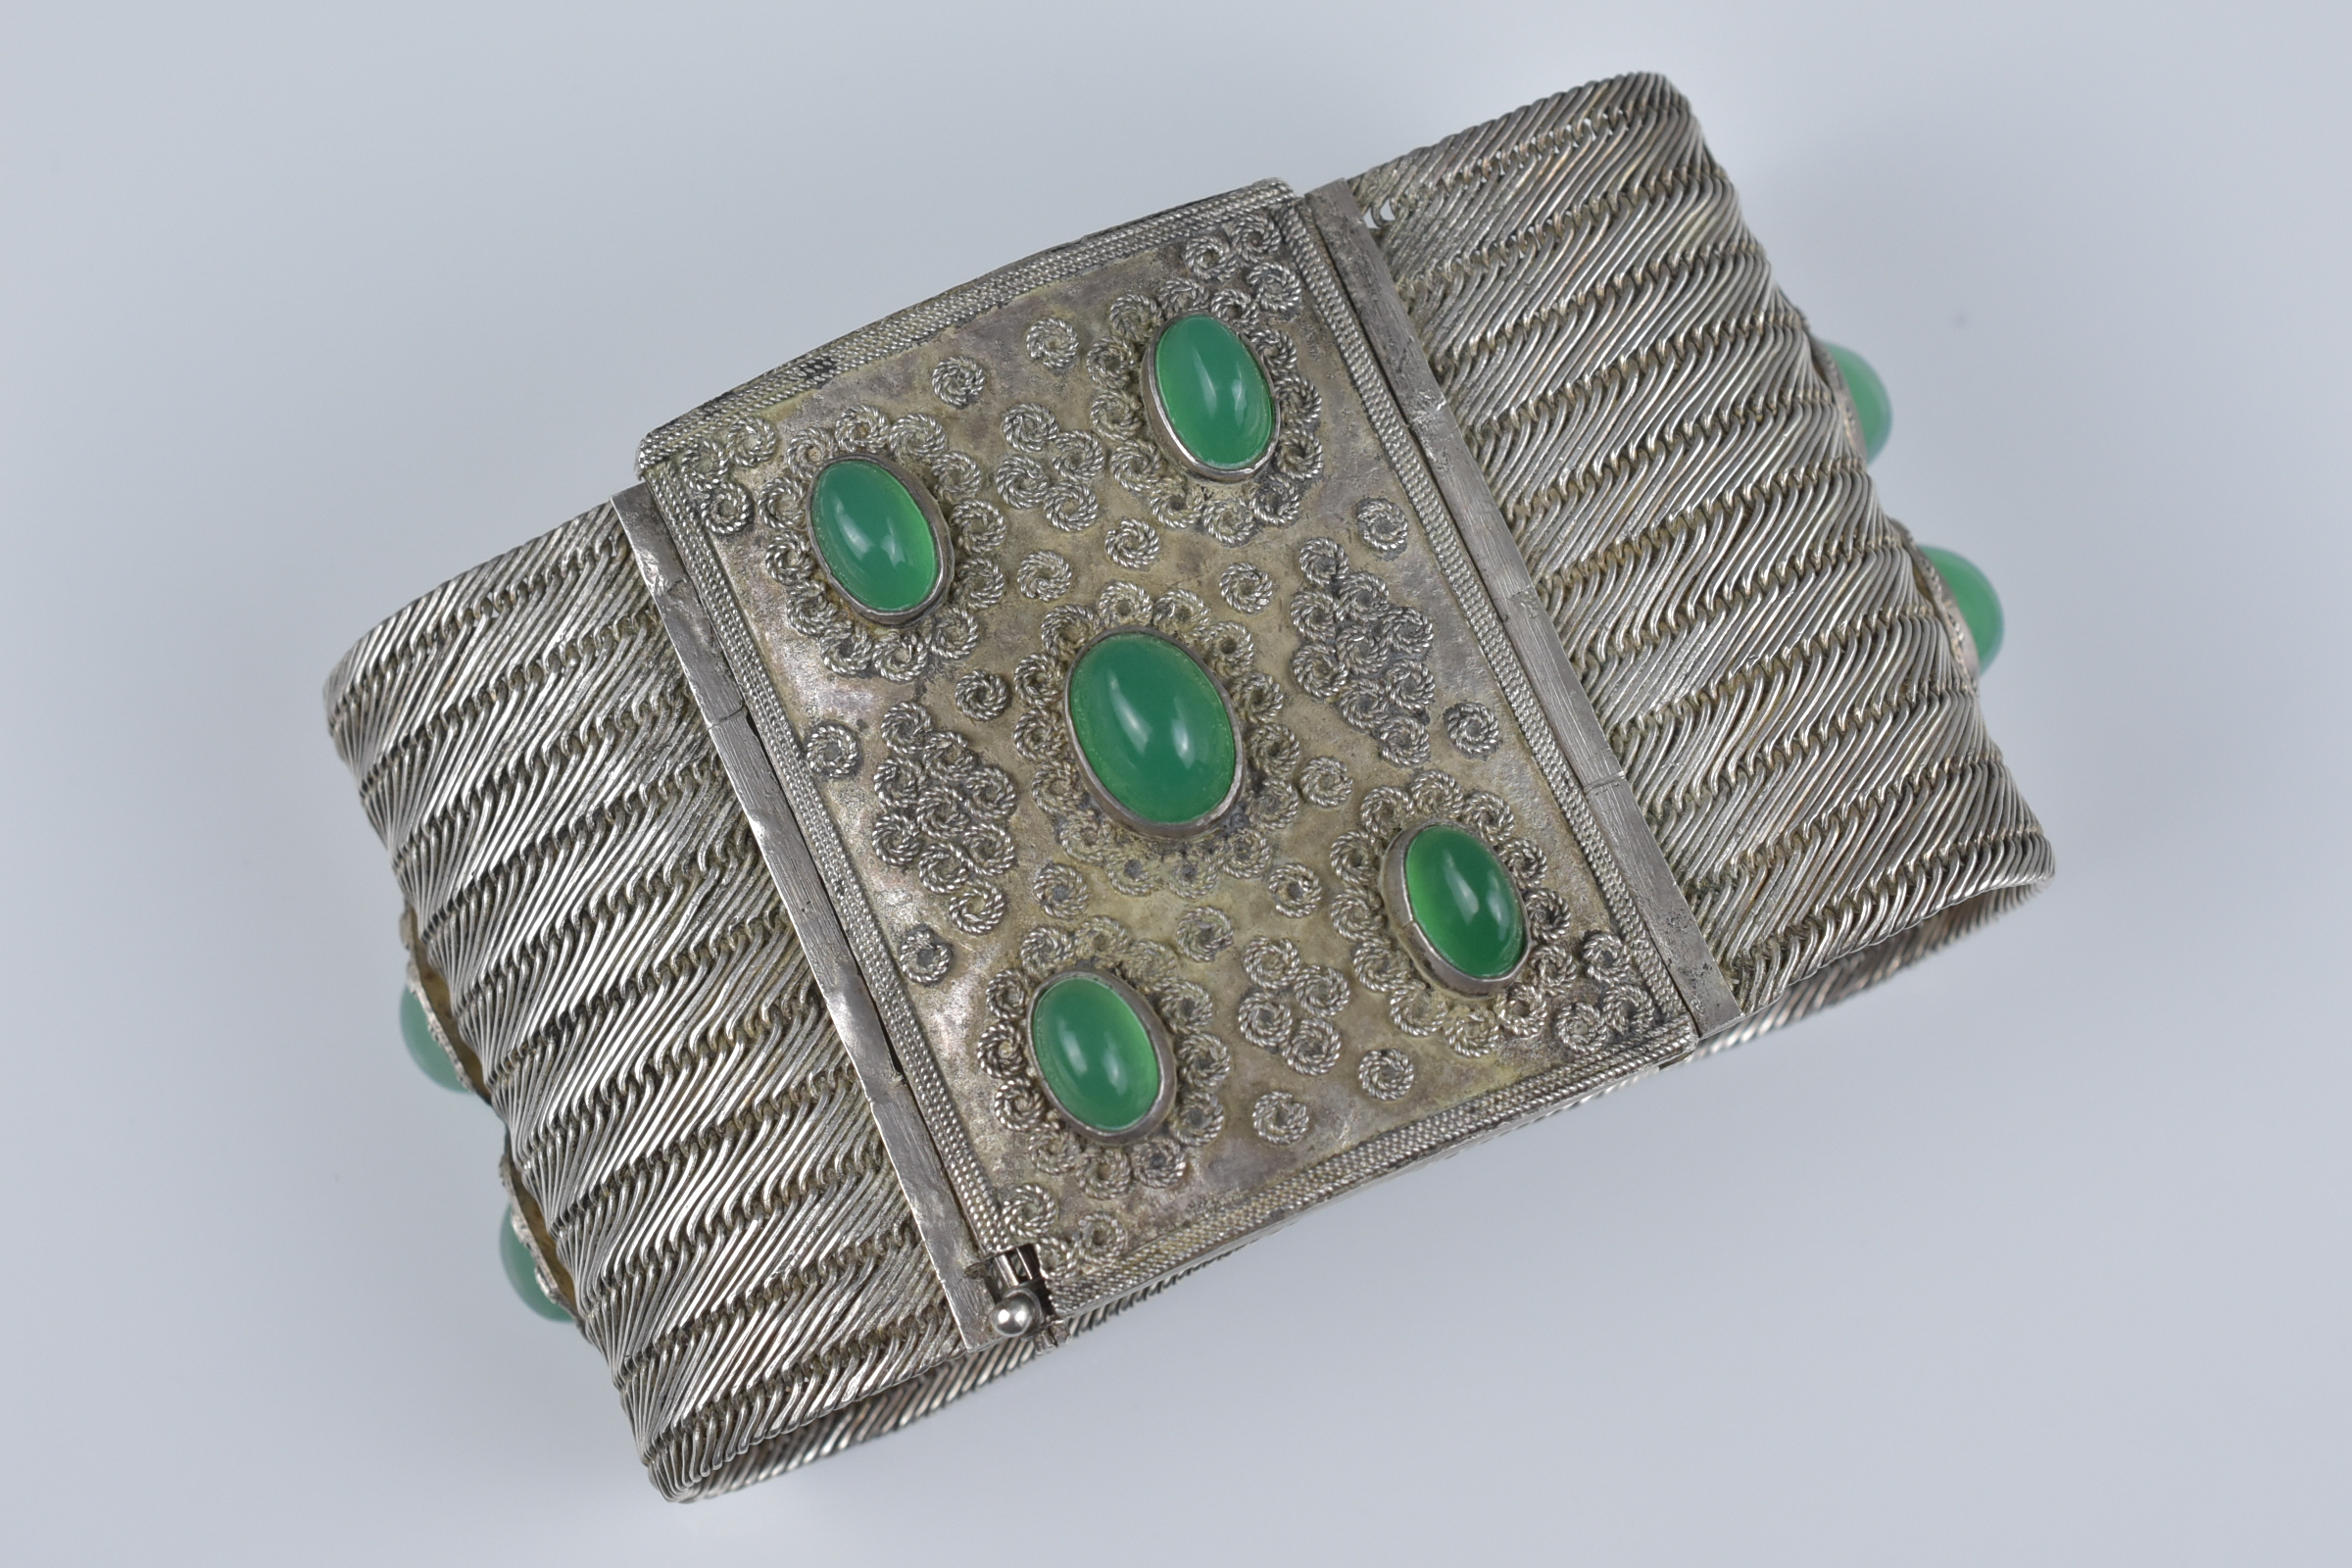 An antique silver metal and chrysoprase cuff bracelet